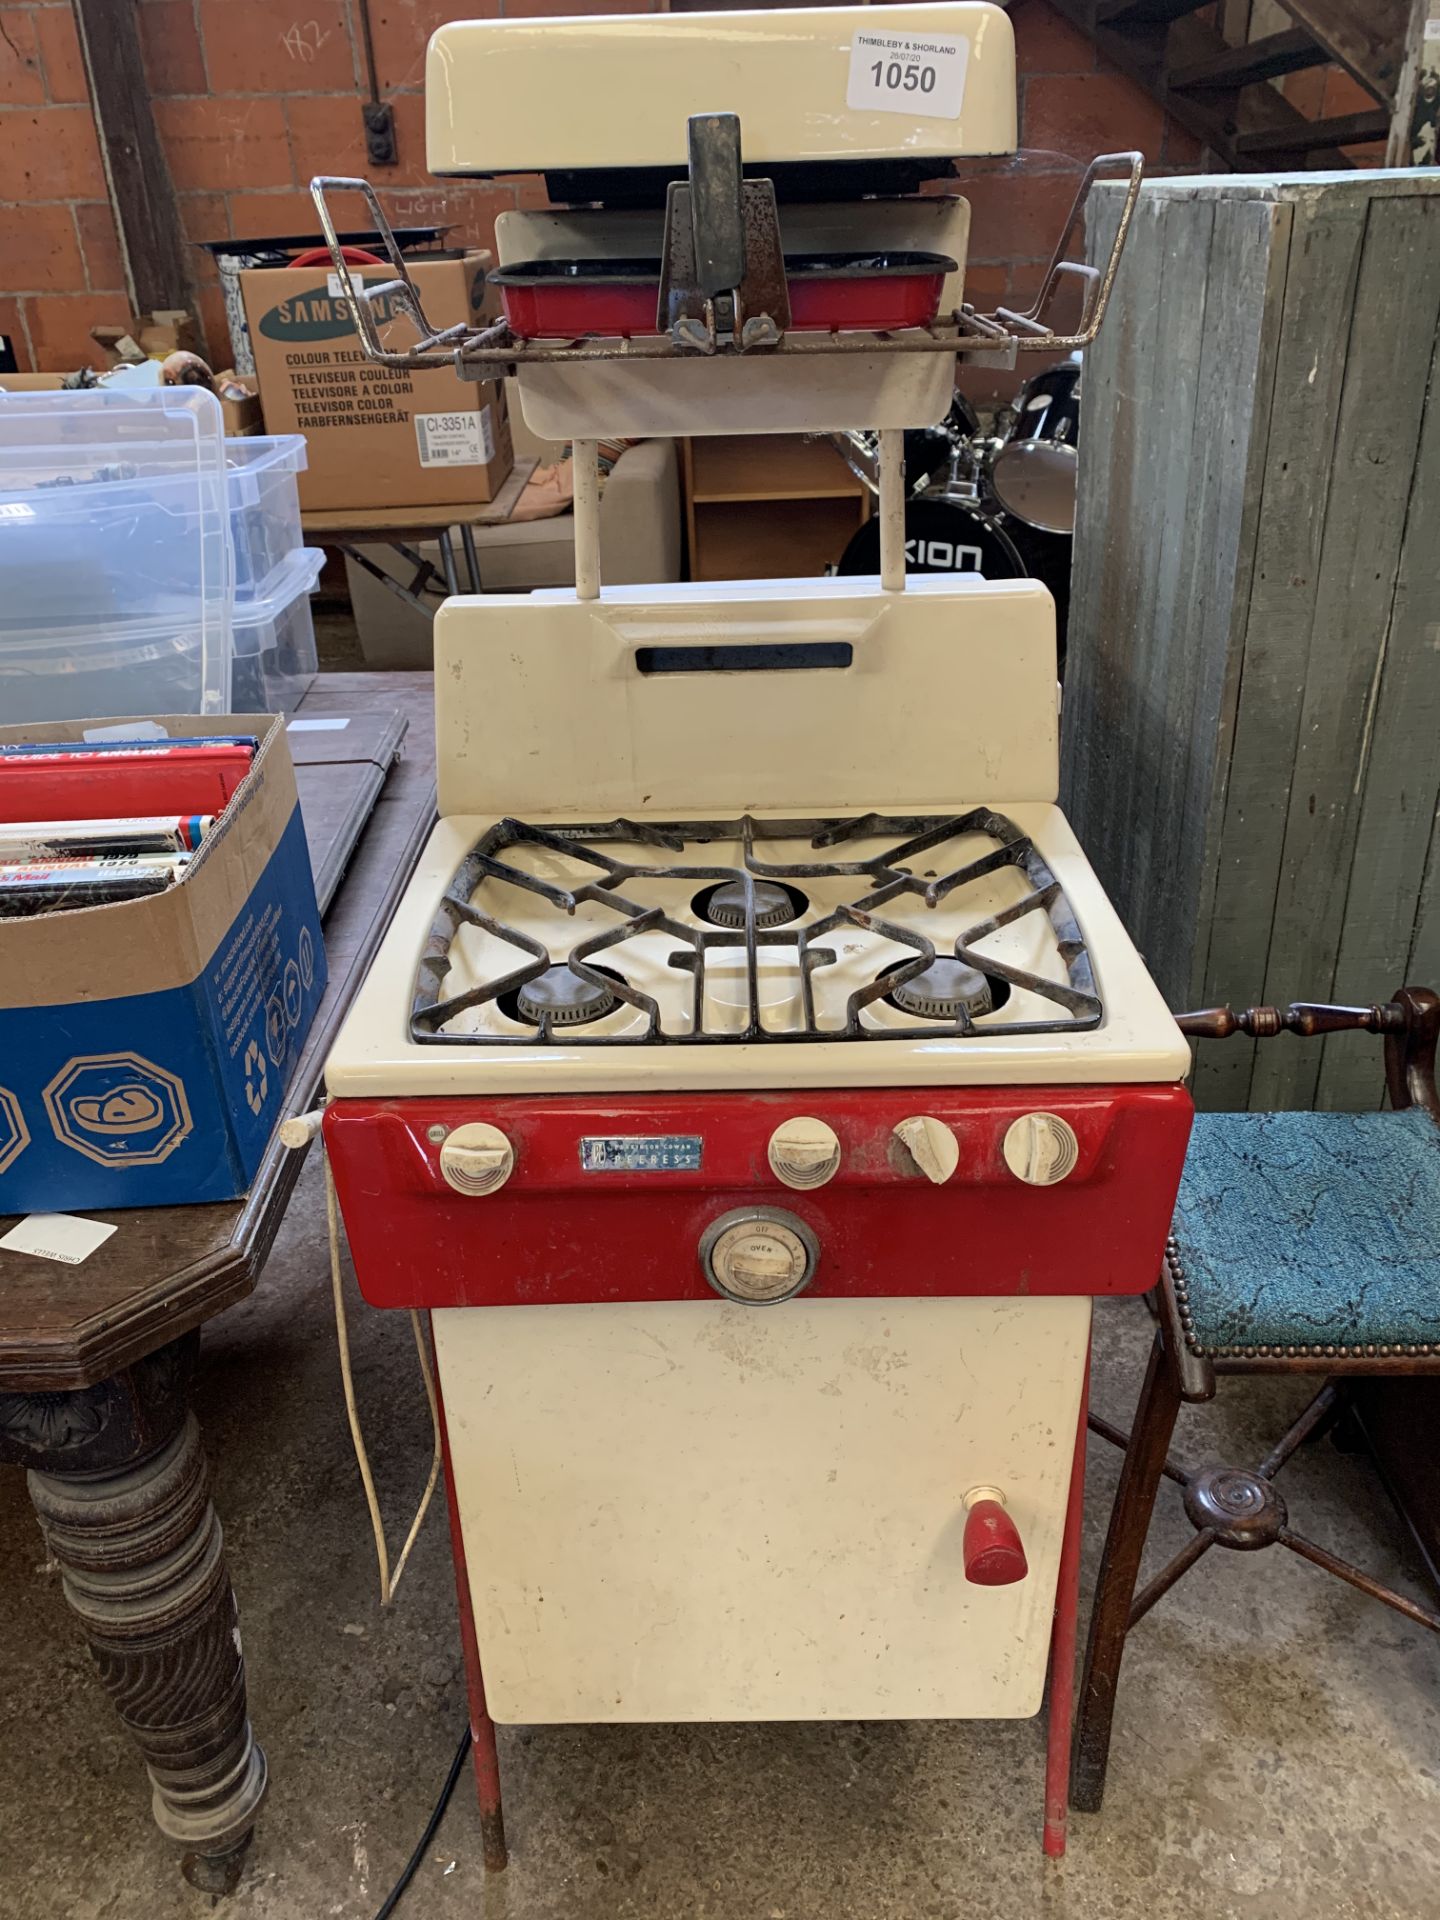 Parkinson Cowan Pieress gas oven and grill.